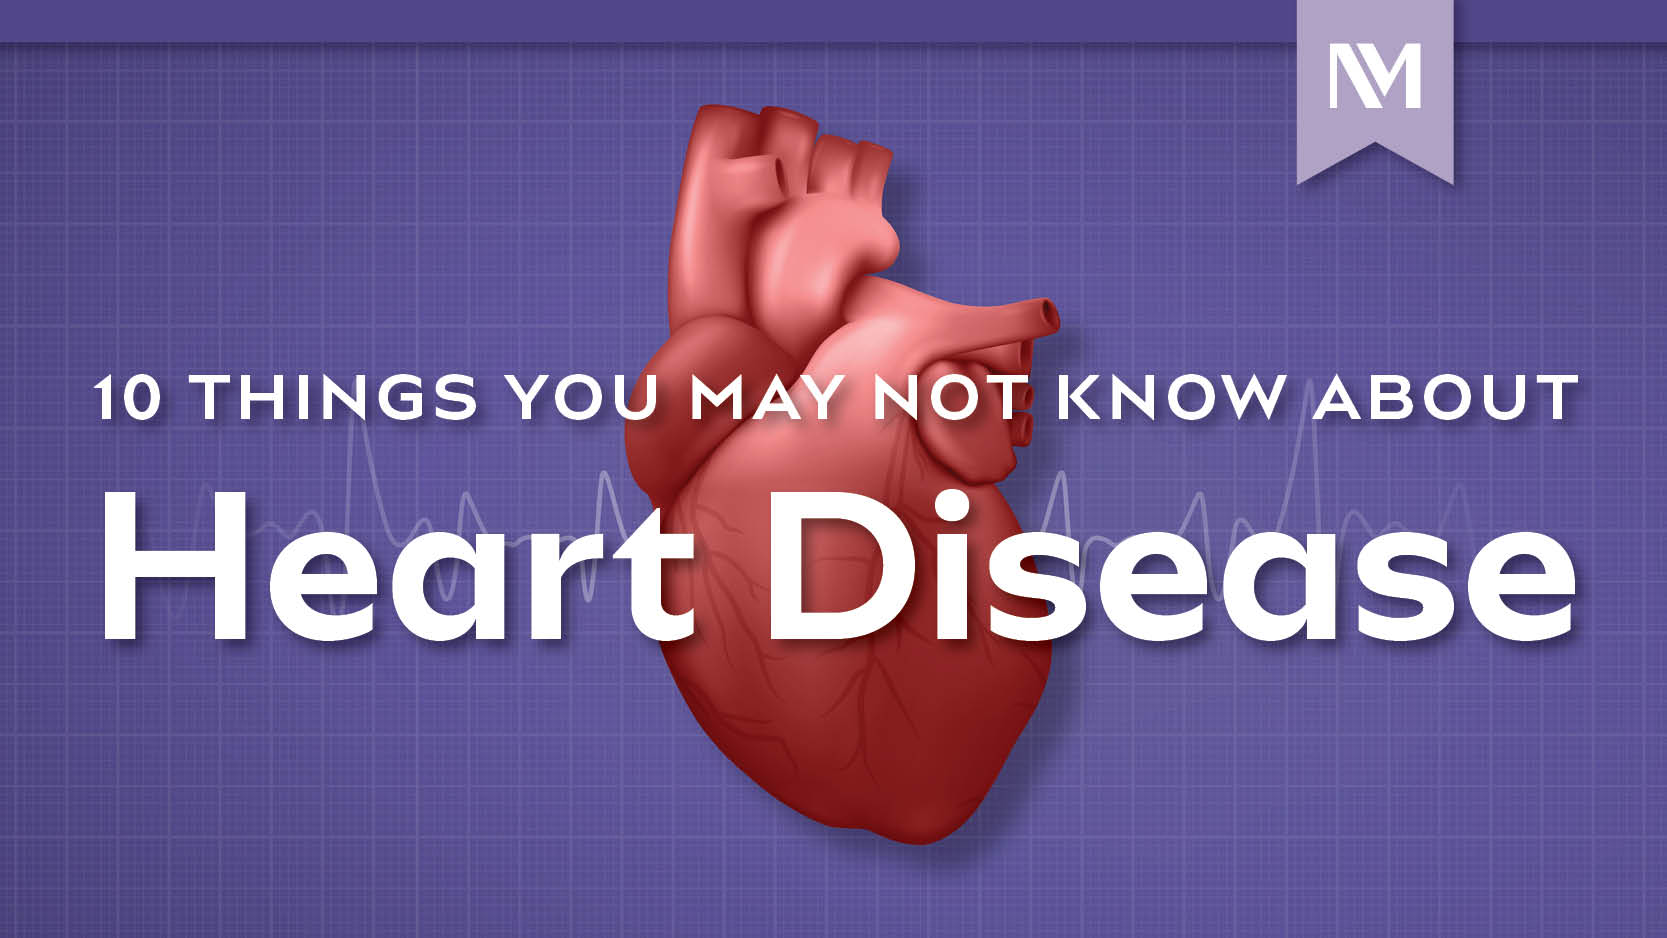 nm-10-things-you-may-not-know-heart-disease_preview